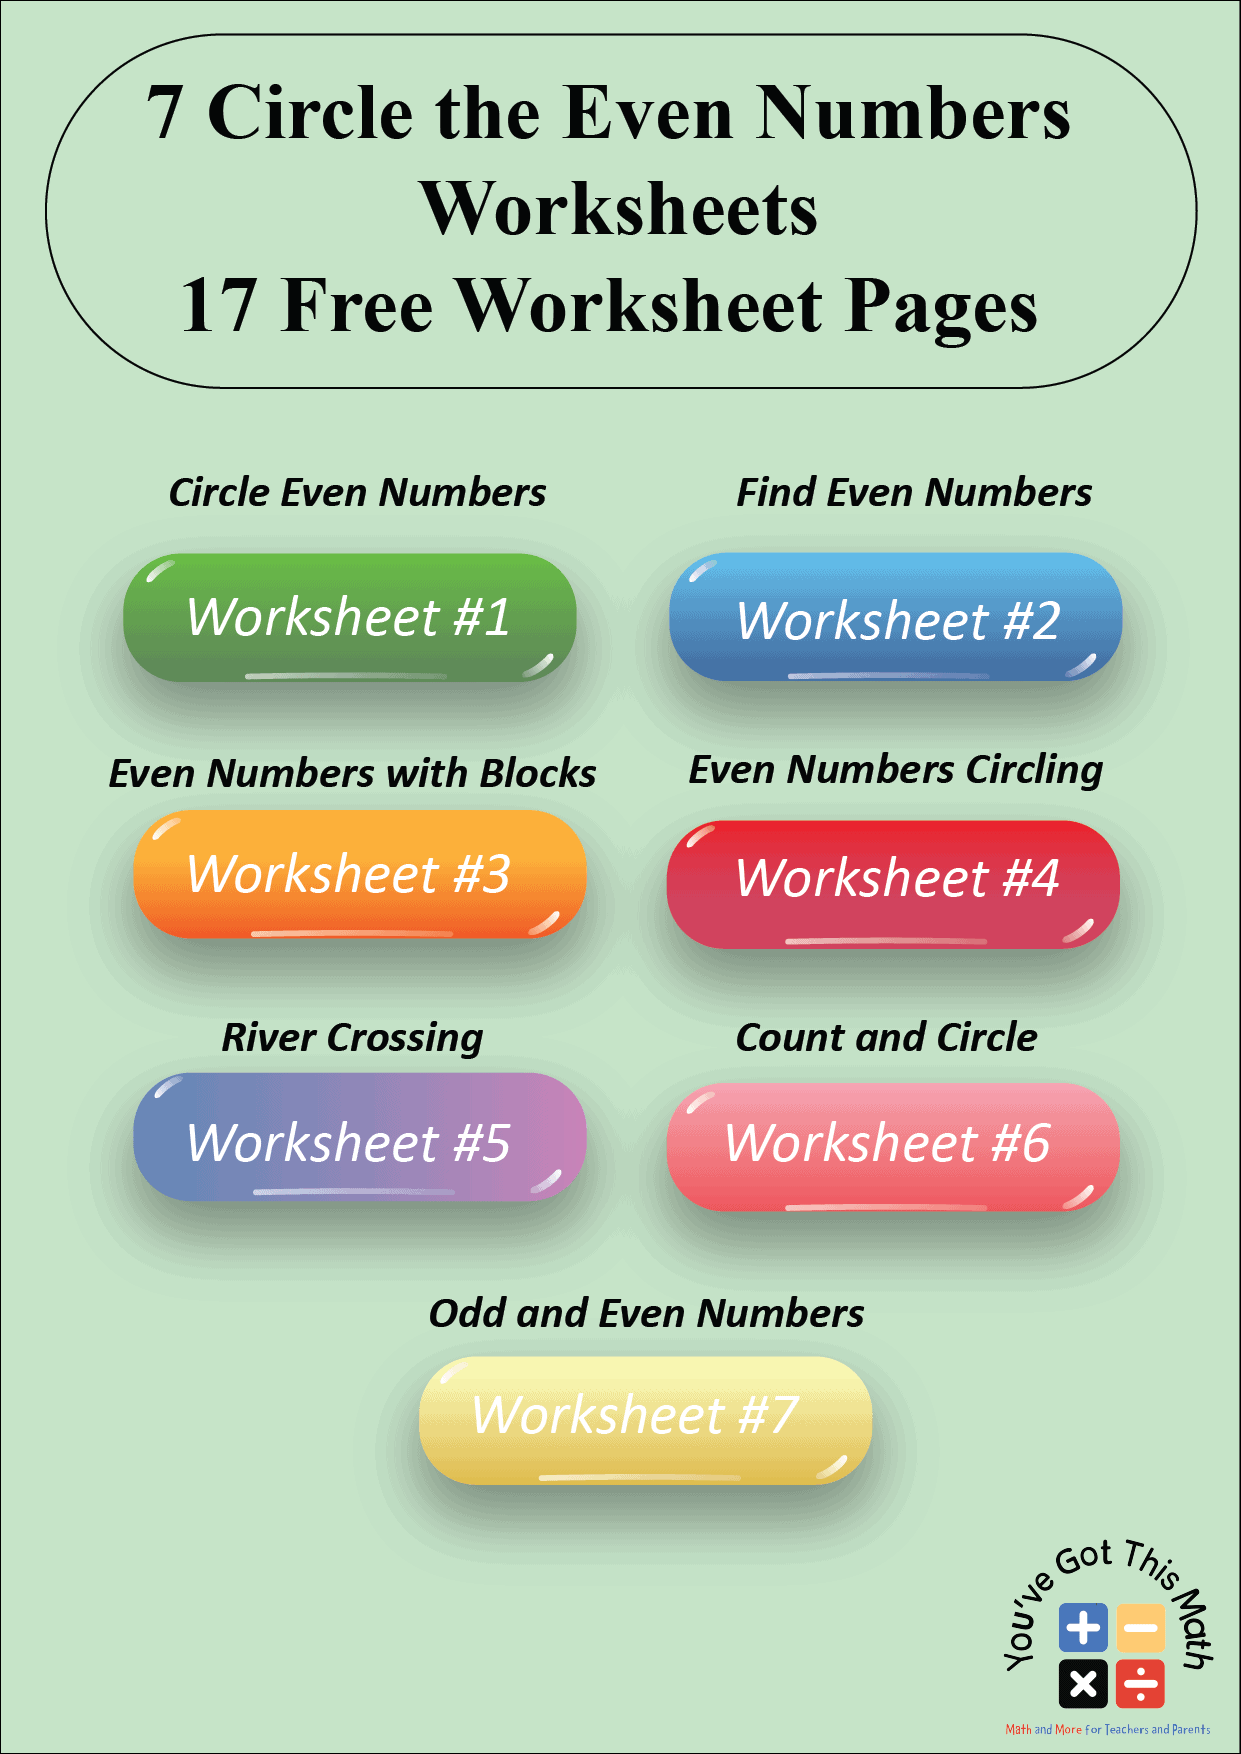 Circle the Even Numbers Worksheets